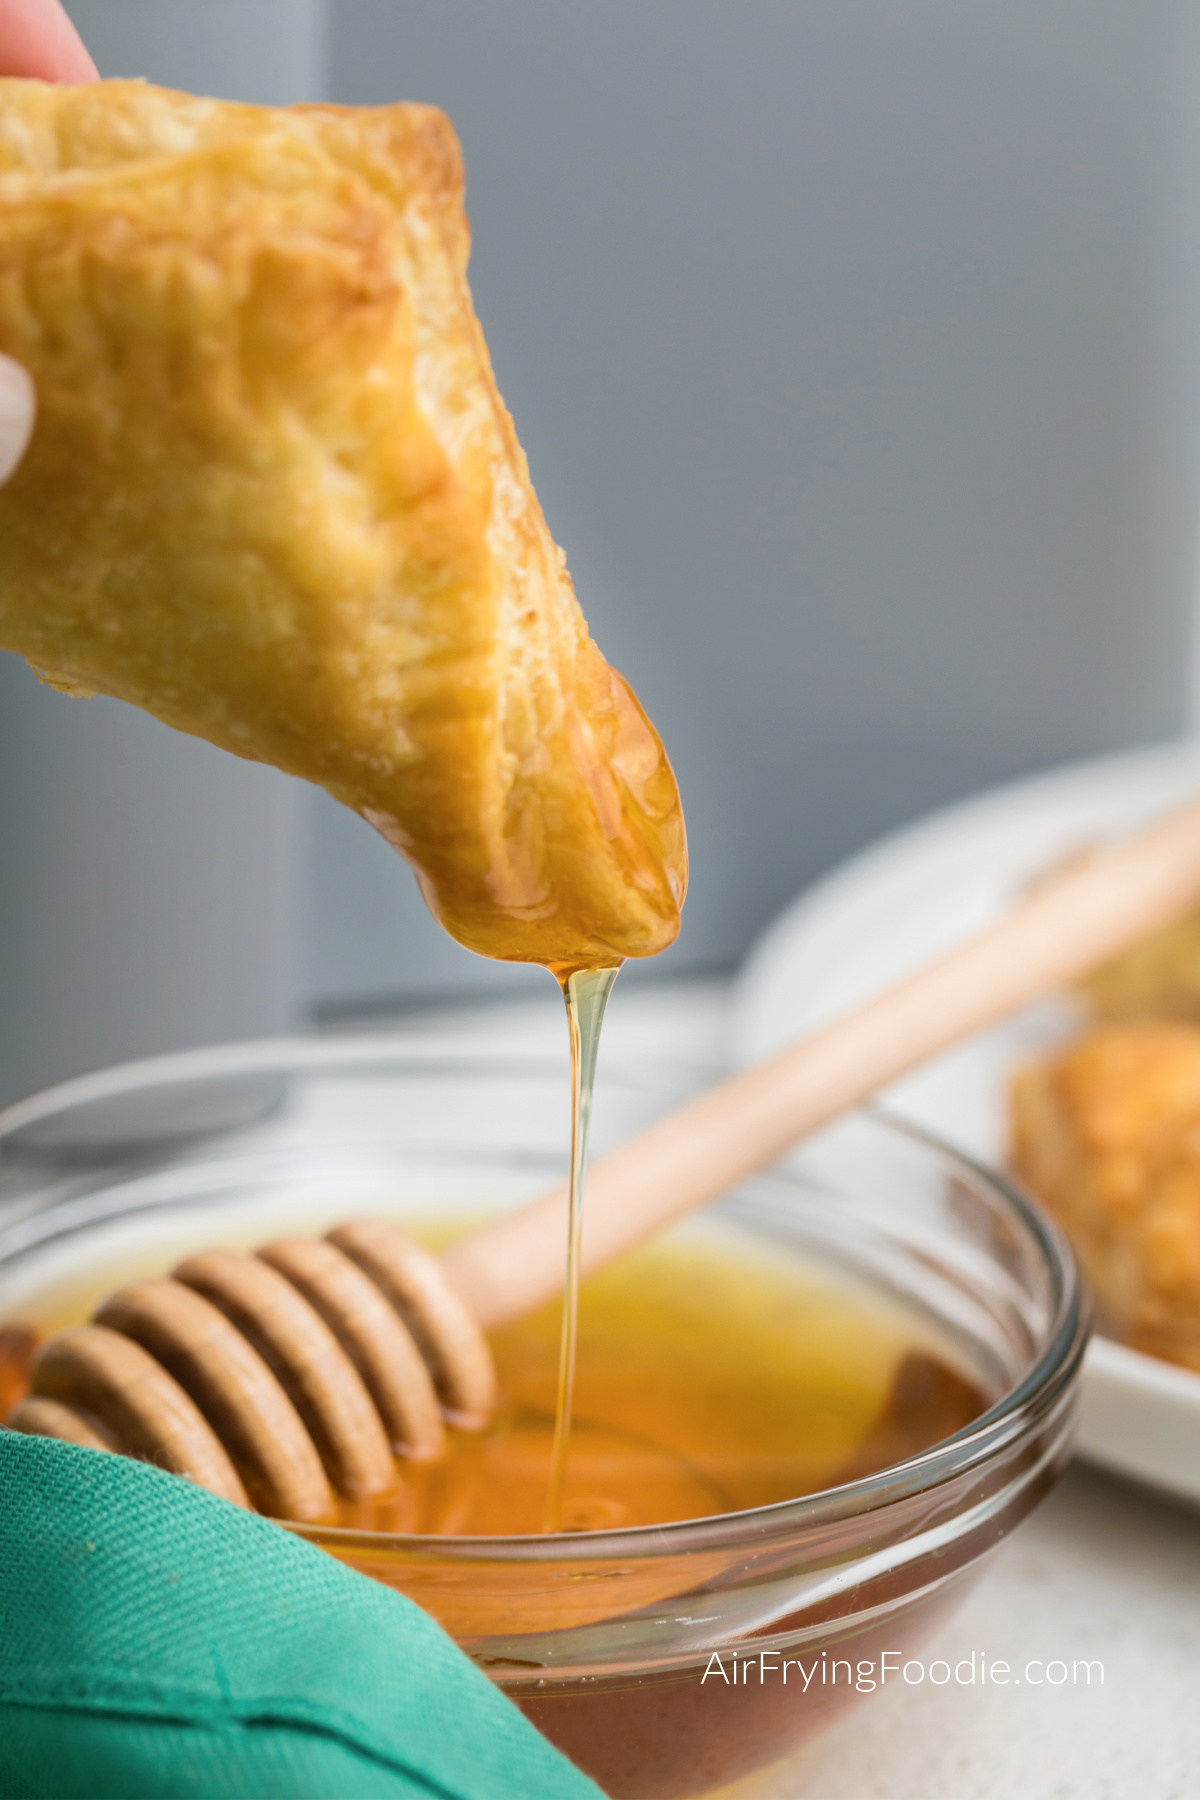 Cream cheese puff pastry being dipped into honey.